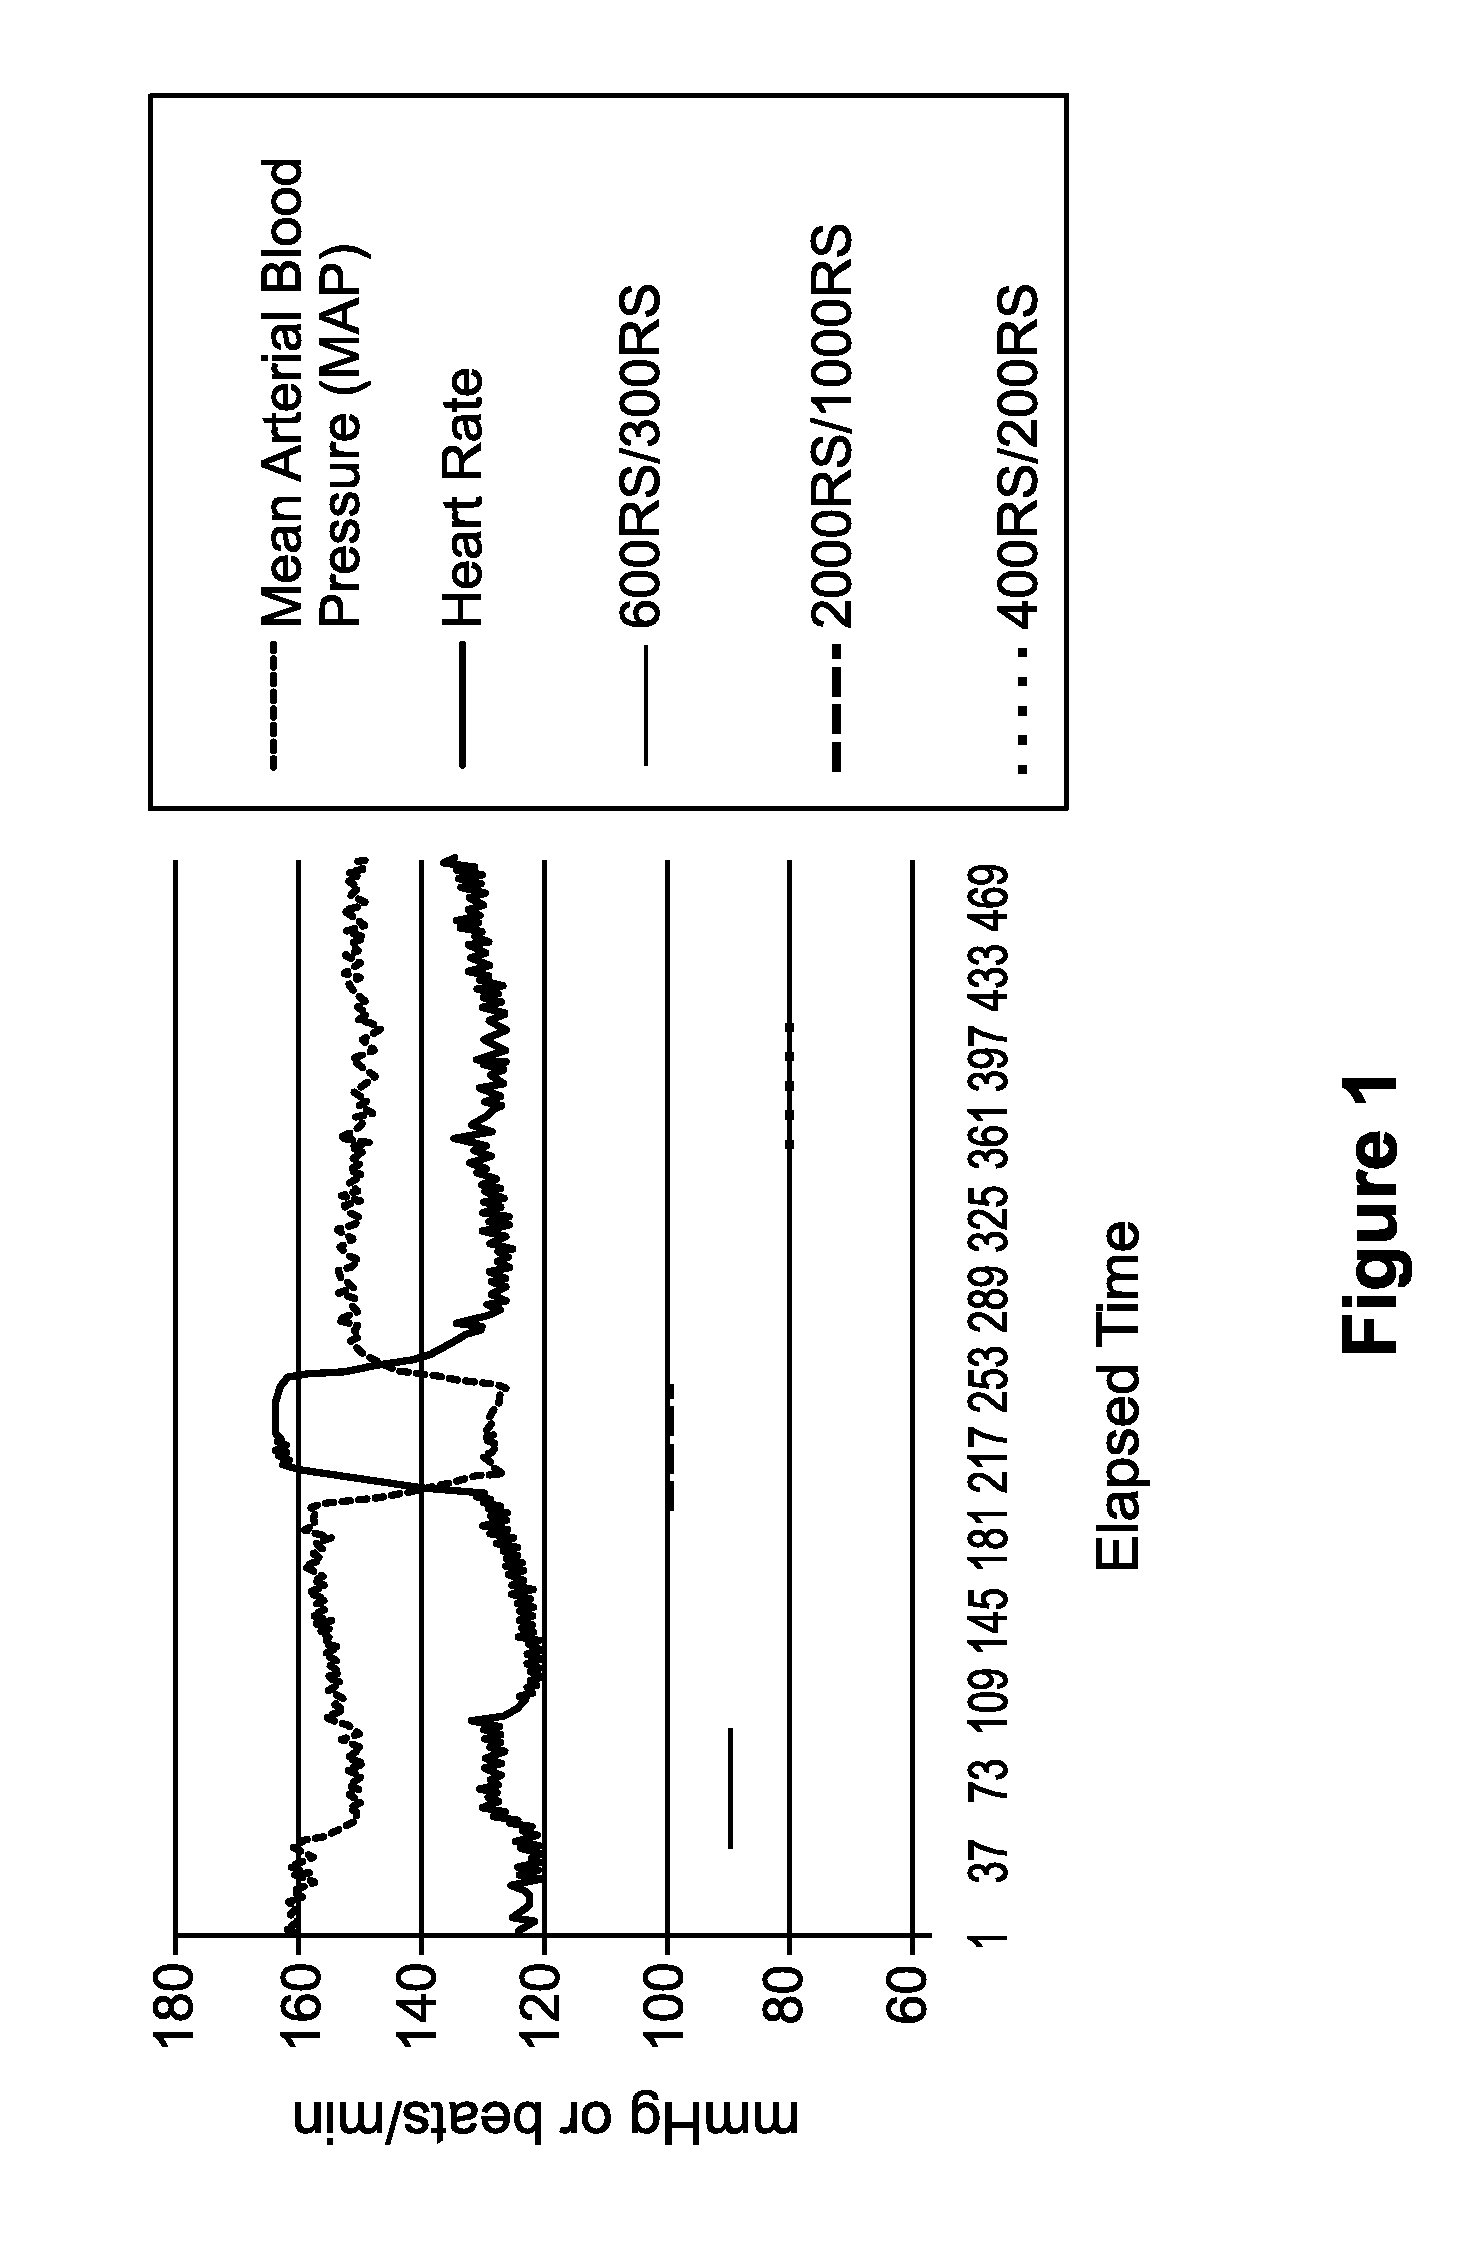 Methods of Treating Tachycardia and/or Controlling Heart Rate While Minimizing and/or Controlling Hypotension